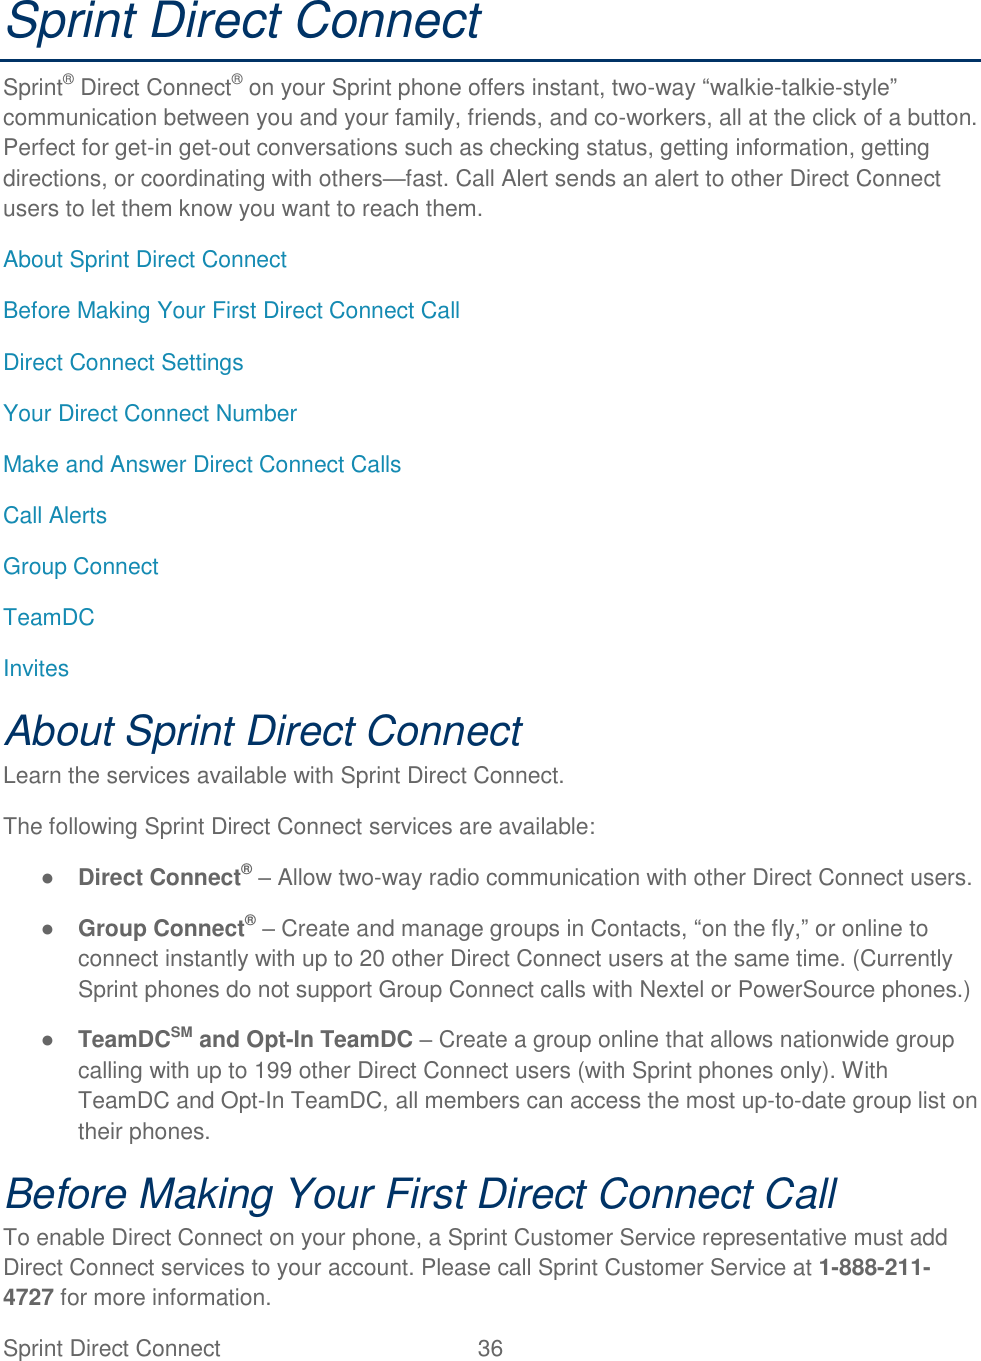  Sprint Direct Connect  36   Sprint Direct Connect Sprint® Direct Connect® on your Sprint phone offers instant, two-way ―walkie-talkie-style‖ communication between you and your family, friends, and co-workers, all at the click of a button. Perfect for get-in get-out conversations such as checking status, getting information, getting directions, or coordinating with others—fast. Call Alert sends an alert to other Direct Connect users to let them know you want to reach them. About Sprint Direct Connect Before Making Your First Direct Connect Call Direct Connect Settings Your Direct Connect Number Make and Answer Direct Connect Calls Call Alerts Group Connect TeamDC Invites About Sprint Direct Connect Learn the services available with Sprint Direct Connect. The following Sprint Direct Connect services are available: ● Direct Connect® – Allow two-way radio communication with other Direct Connect users. ● Group Connect® – Create and manage groups in Contacts, ―on the fly,‖ or online to connect instantly with up to 20 other Direct Connect users at the same time. (Currently Sprint phones do not support Group Connect calls with Nextel or PowerSource phones.) ● TeamDCSM and Opt-In TeamDC – Create a group online that allows nationwide group calling with up to 199 other Direct Connect users (with Sprint phones only). With TeamDC and Opt-In TeamDC, all members can access the most up-to-date group list on their phones. Before Making Your First Direct Connect Call To enable Direct Connect on your phone, a Sprint Customer Service representative must add Direct Connect services to your account. Please call Sprint Customer Service at 1-888-211-4727 for more information. 